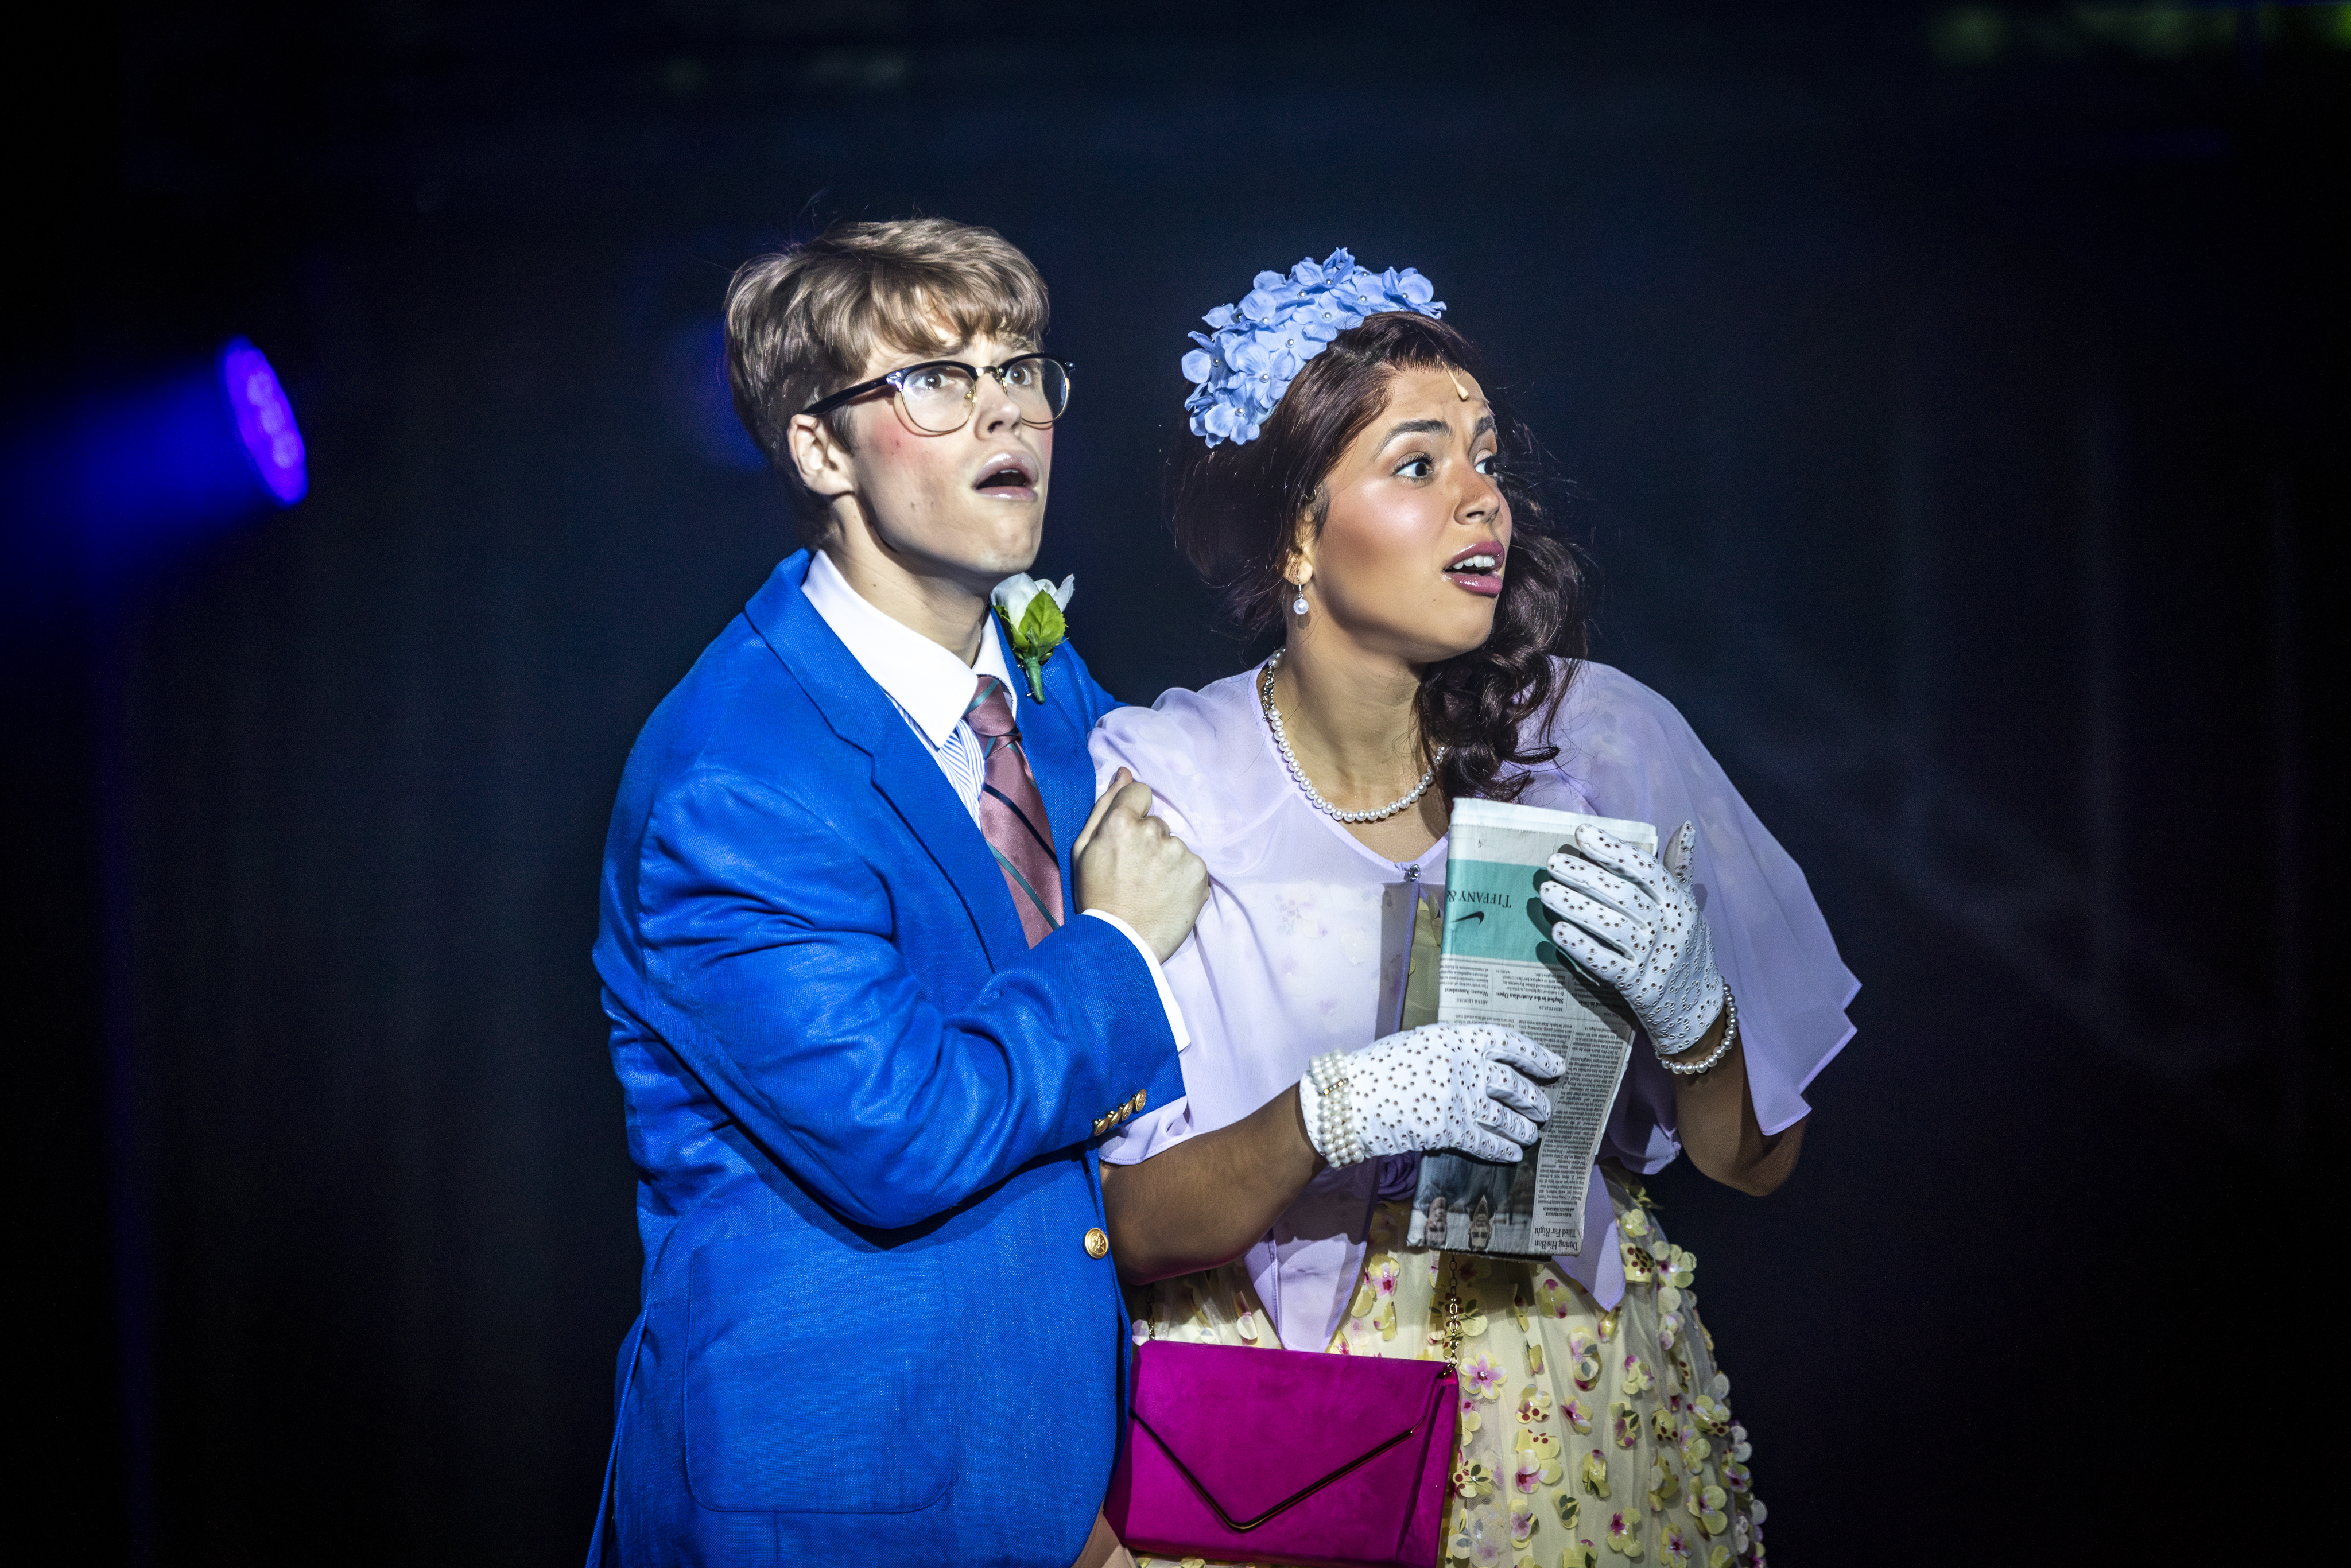 Show in Review: Gryn Productions' “The Rocky Horror Show”